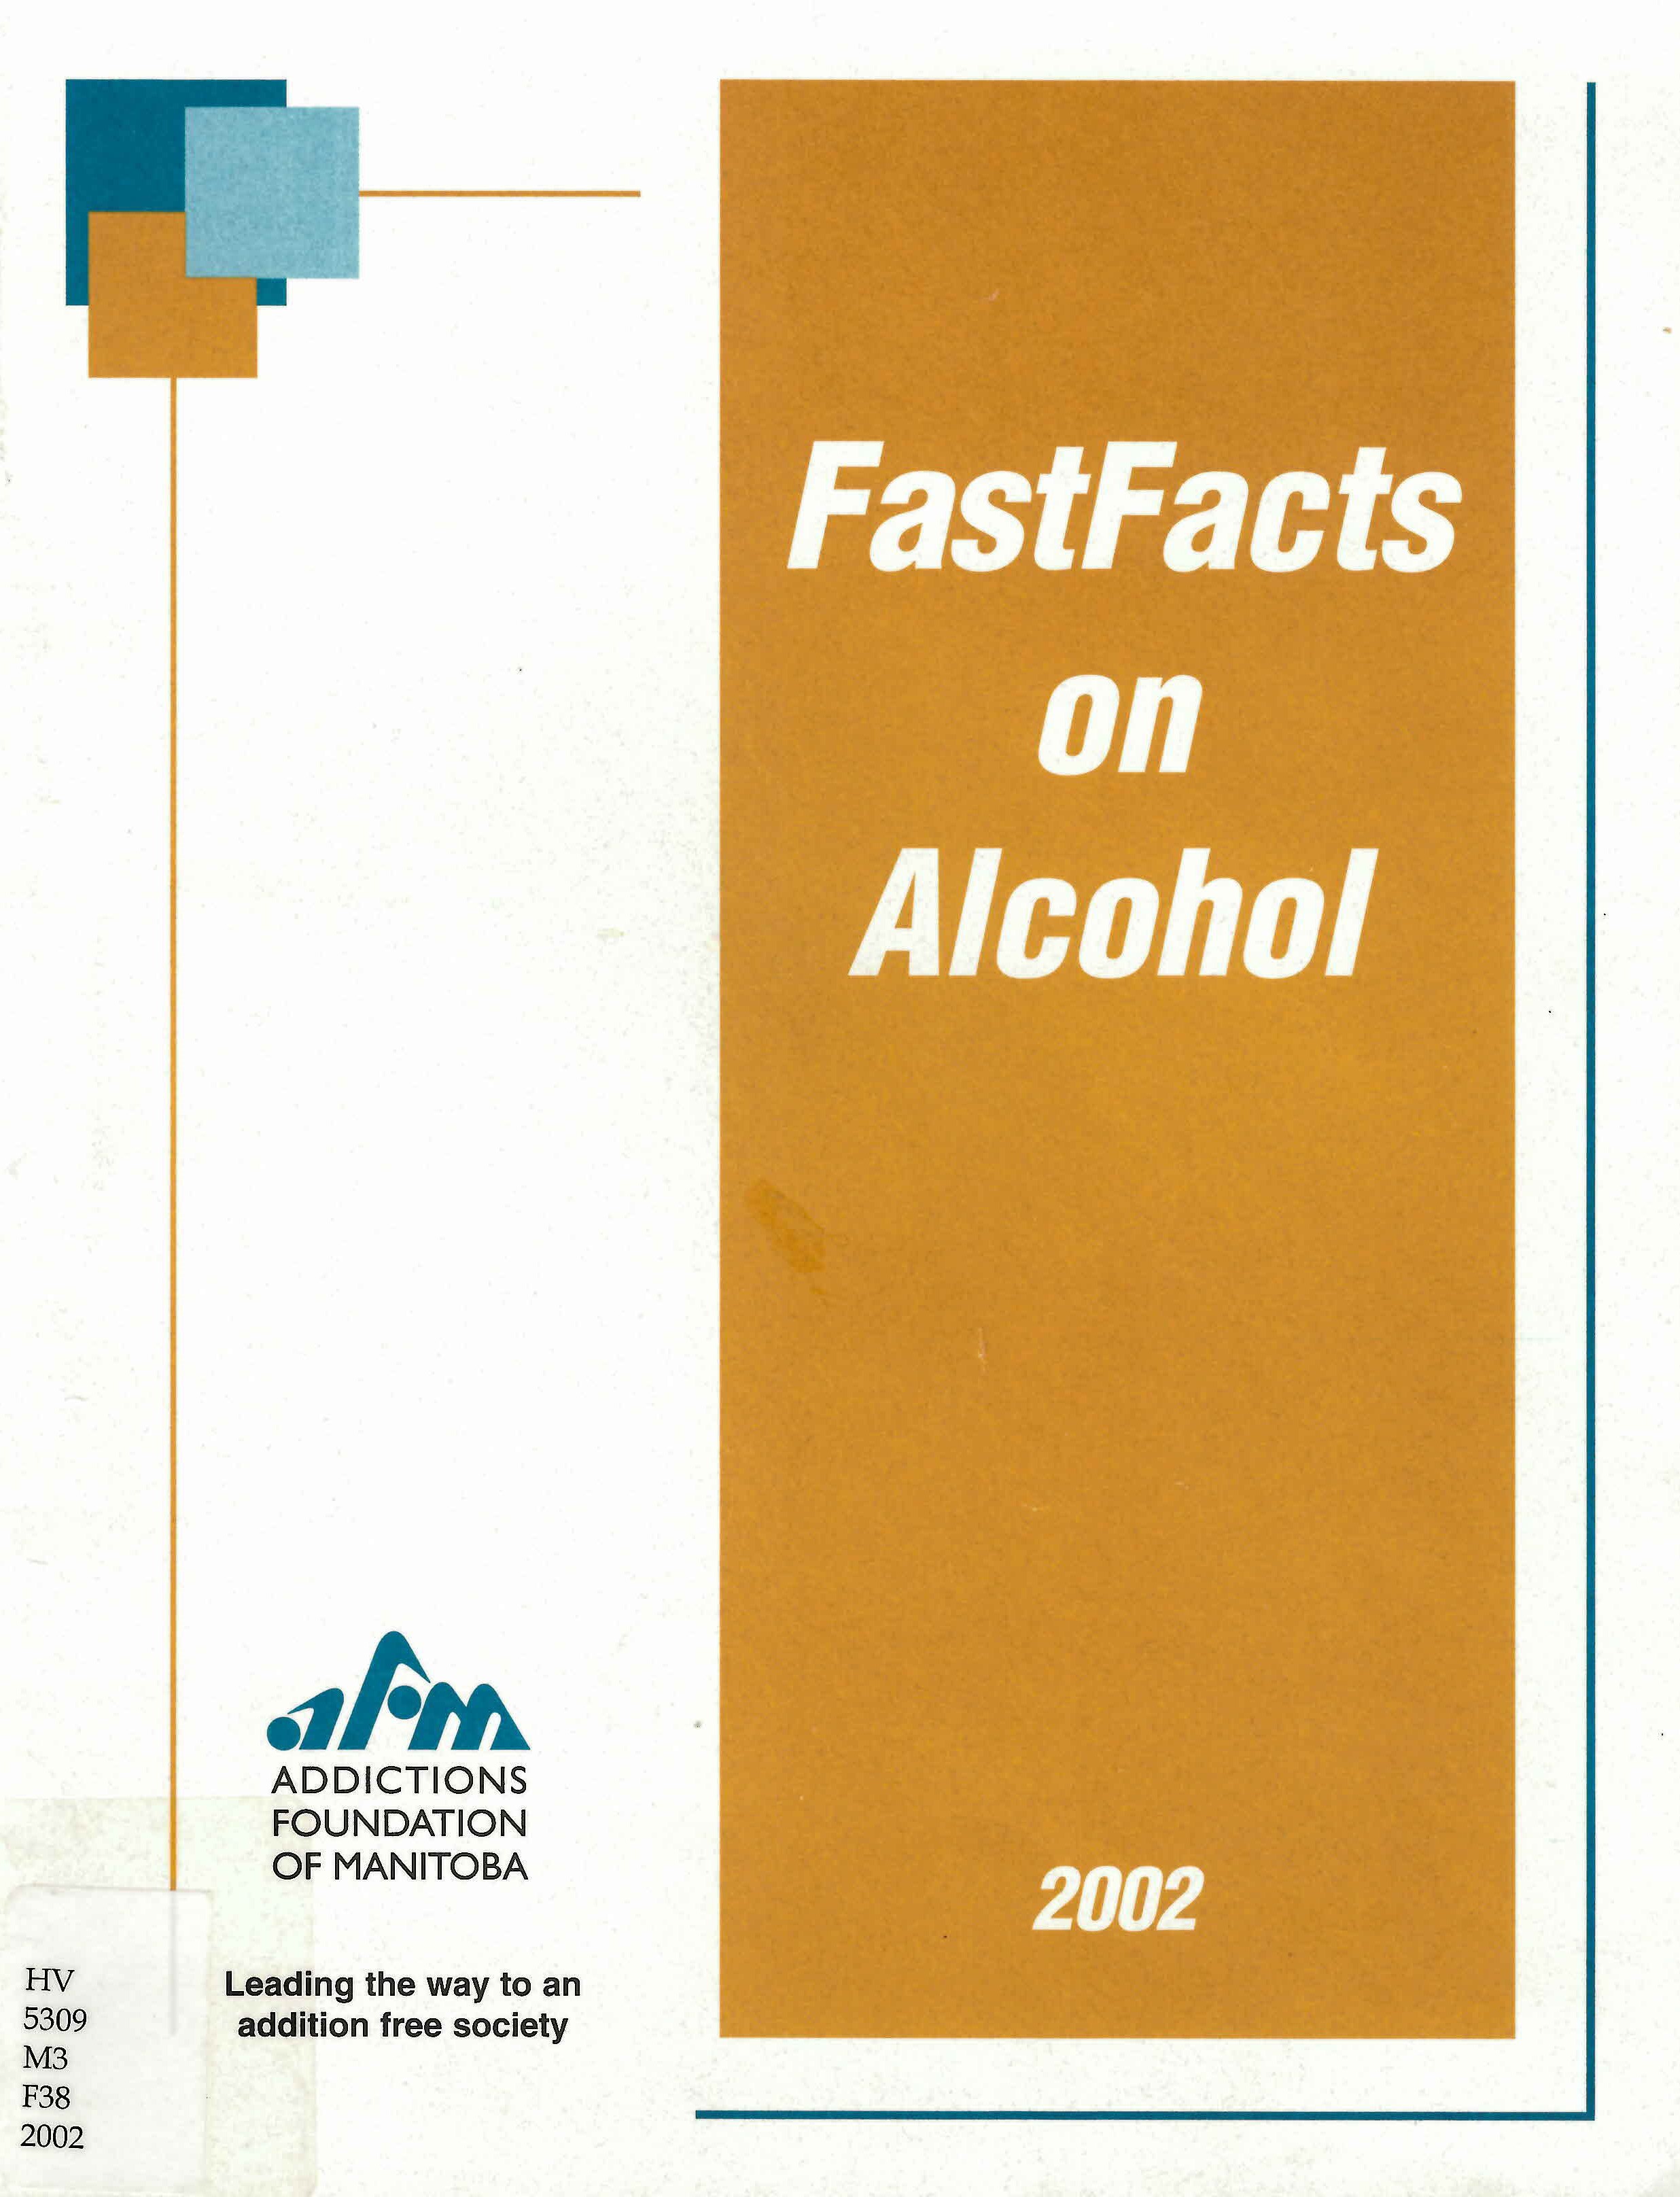 Fastfacts on alcohol